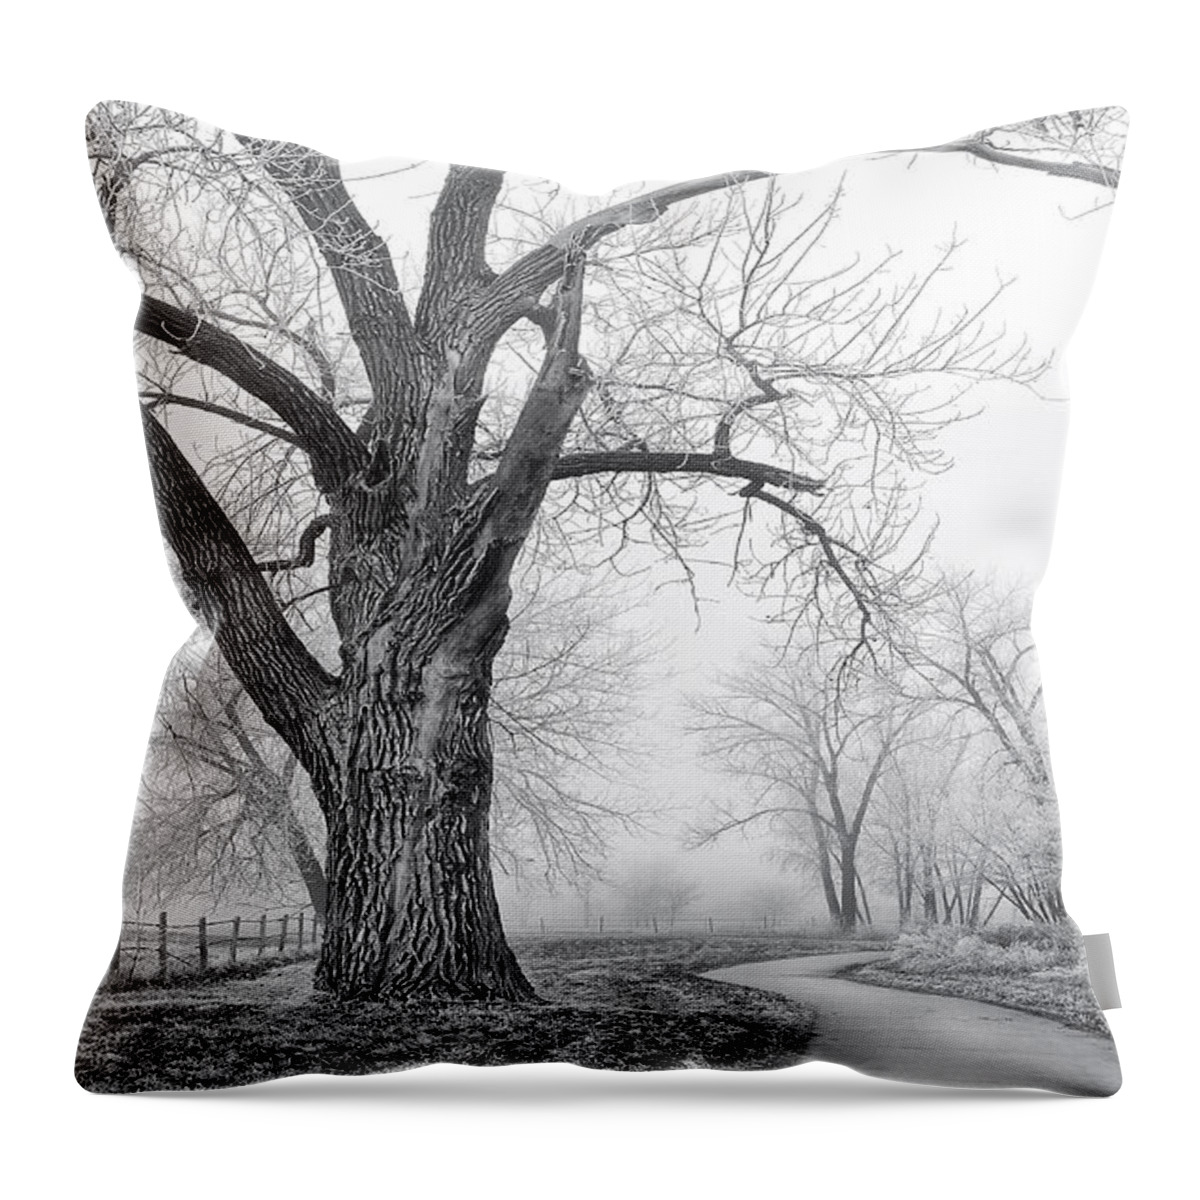 Alley Throw Pillow featuring the photograph Spirit Of The Tree by Kadek Susanto